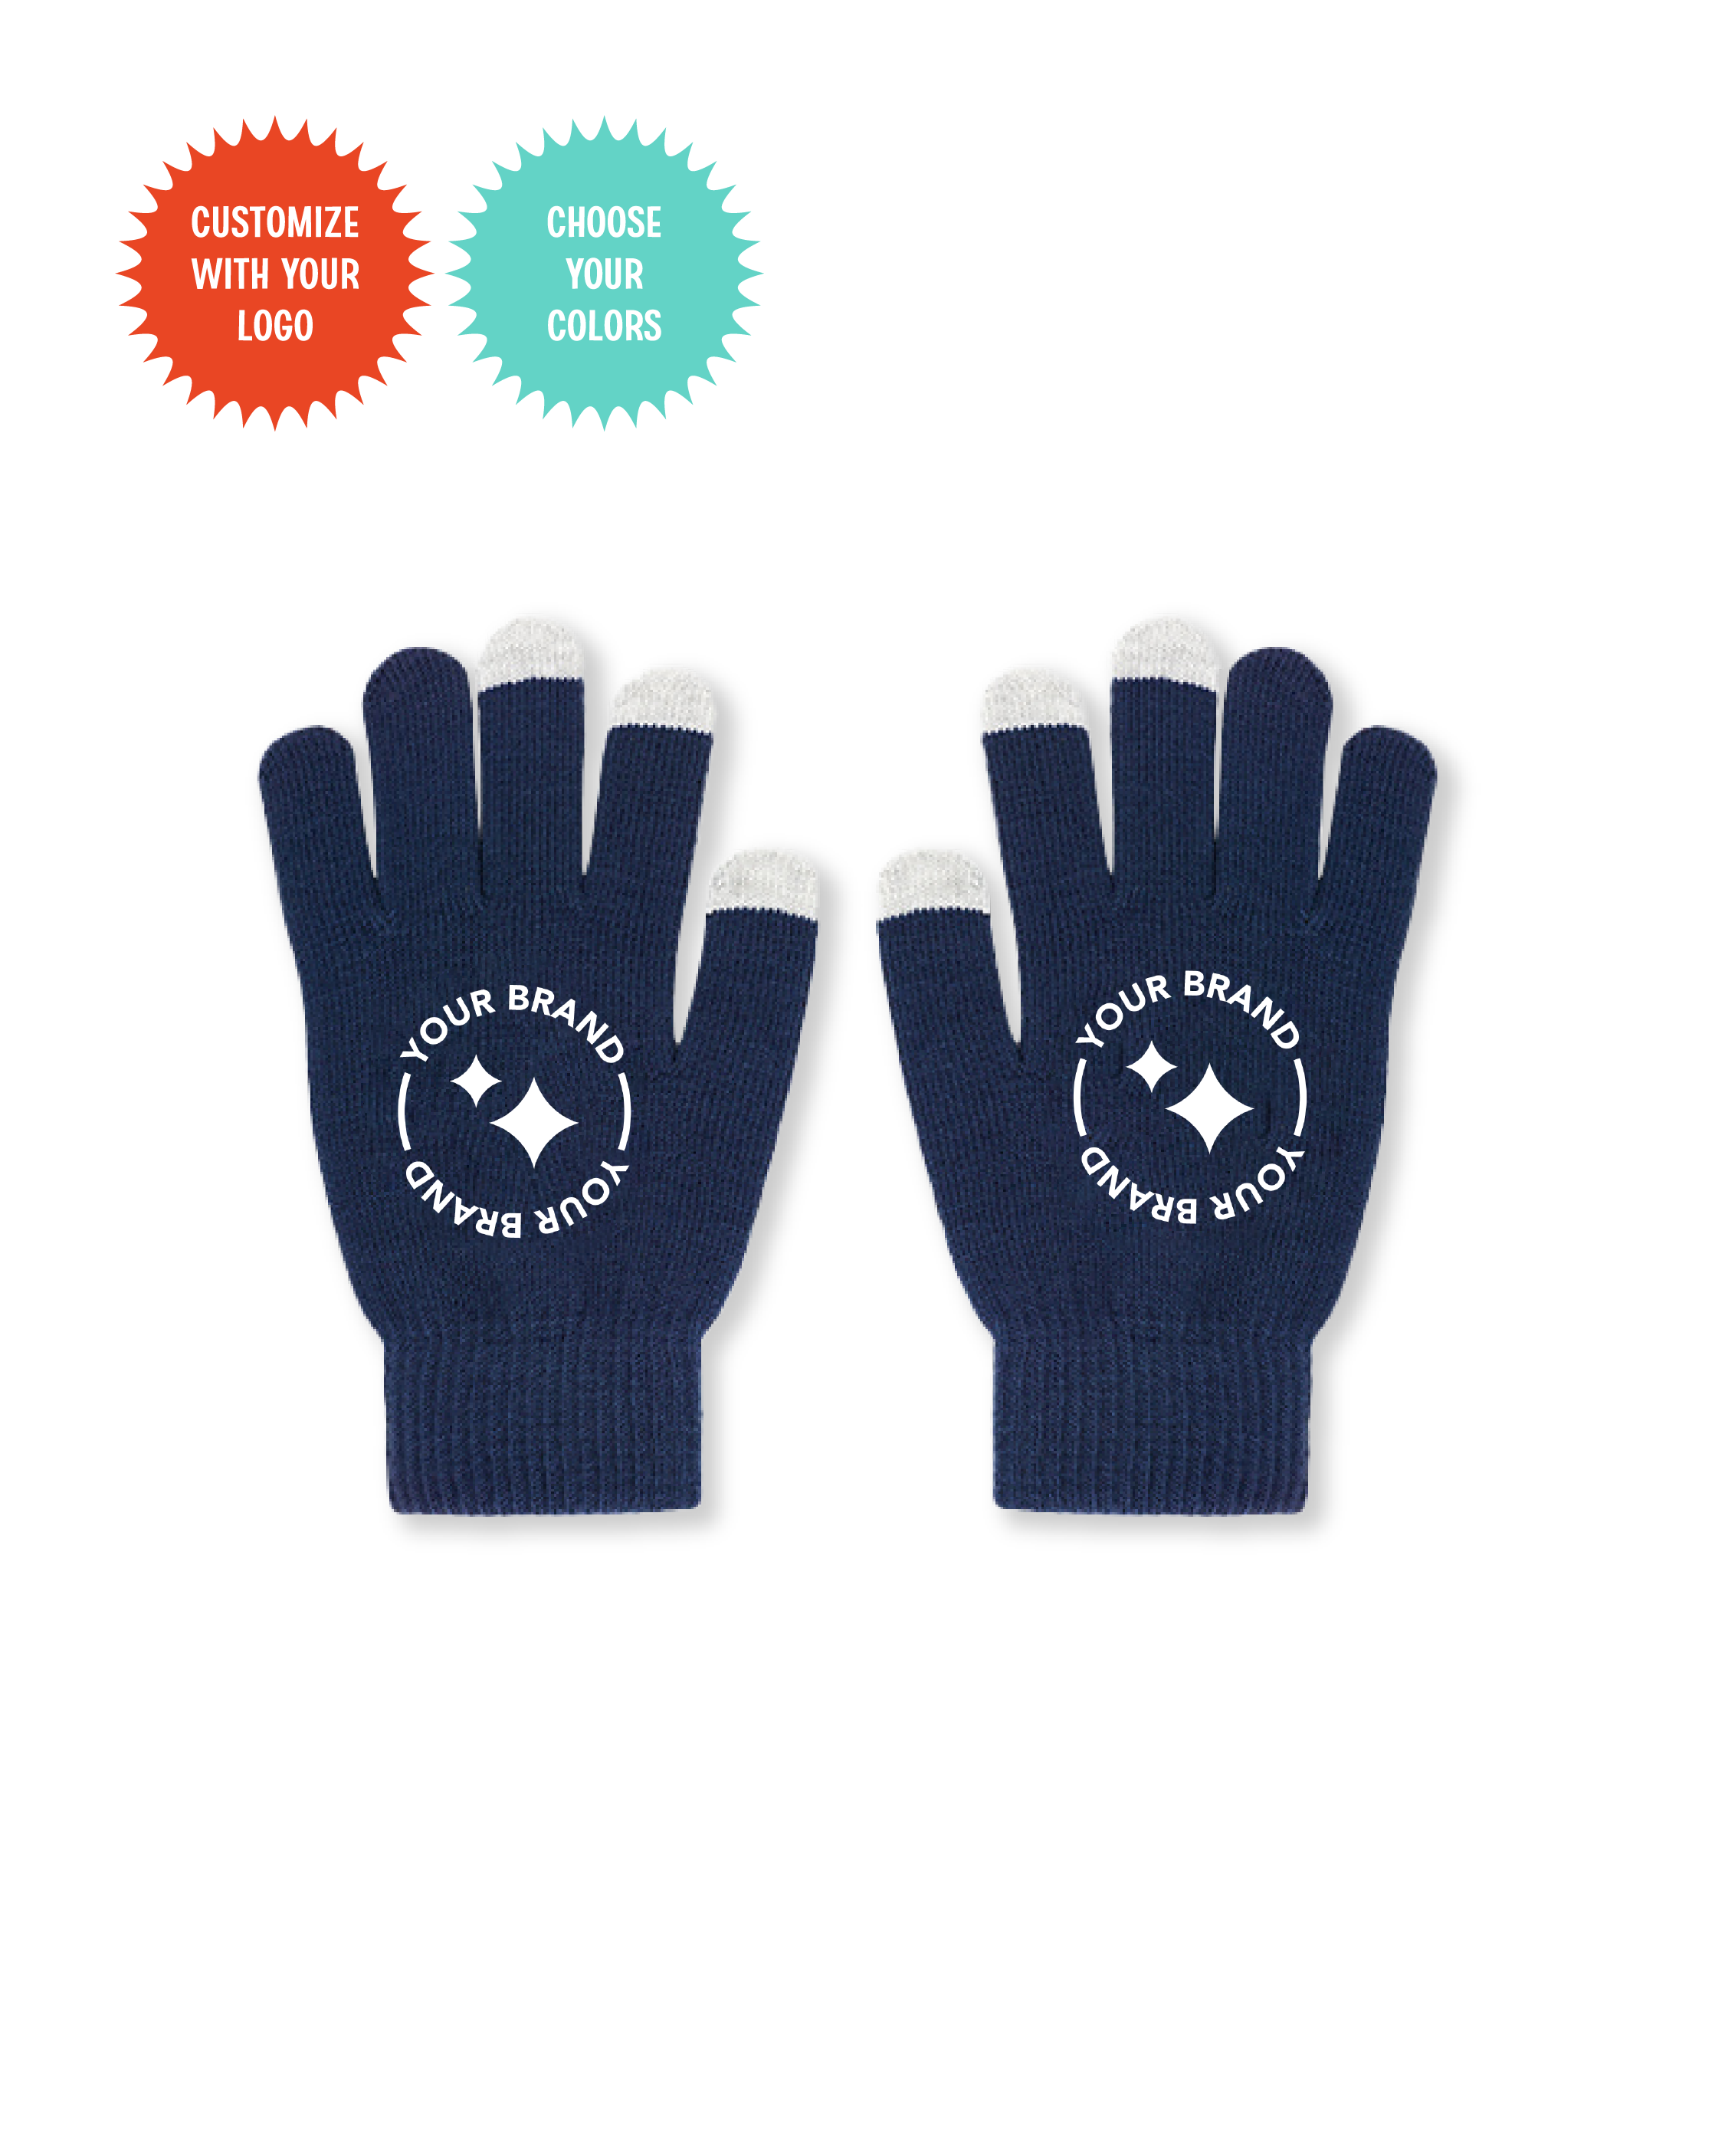 New Gloves In A Bottle Travel Minis - 3x2oz Gift Pack